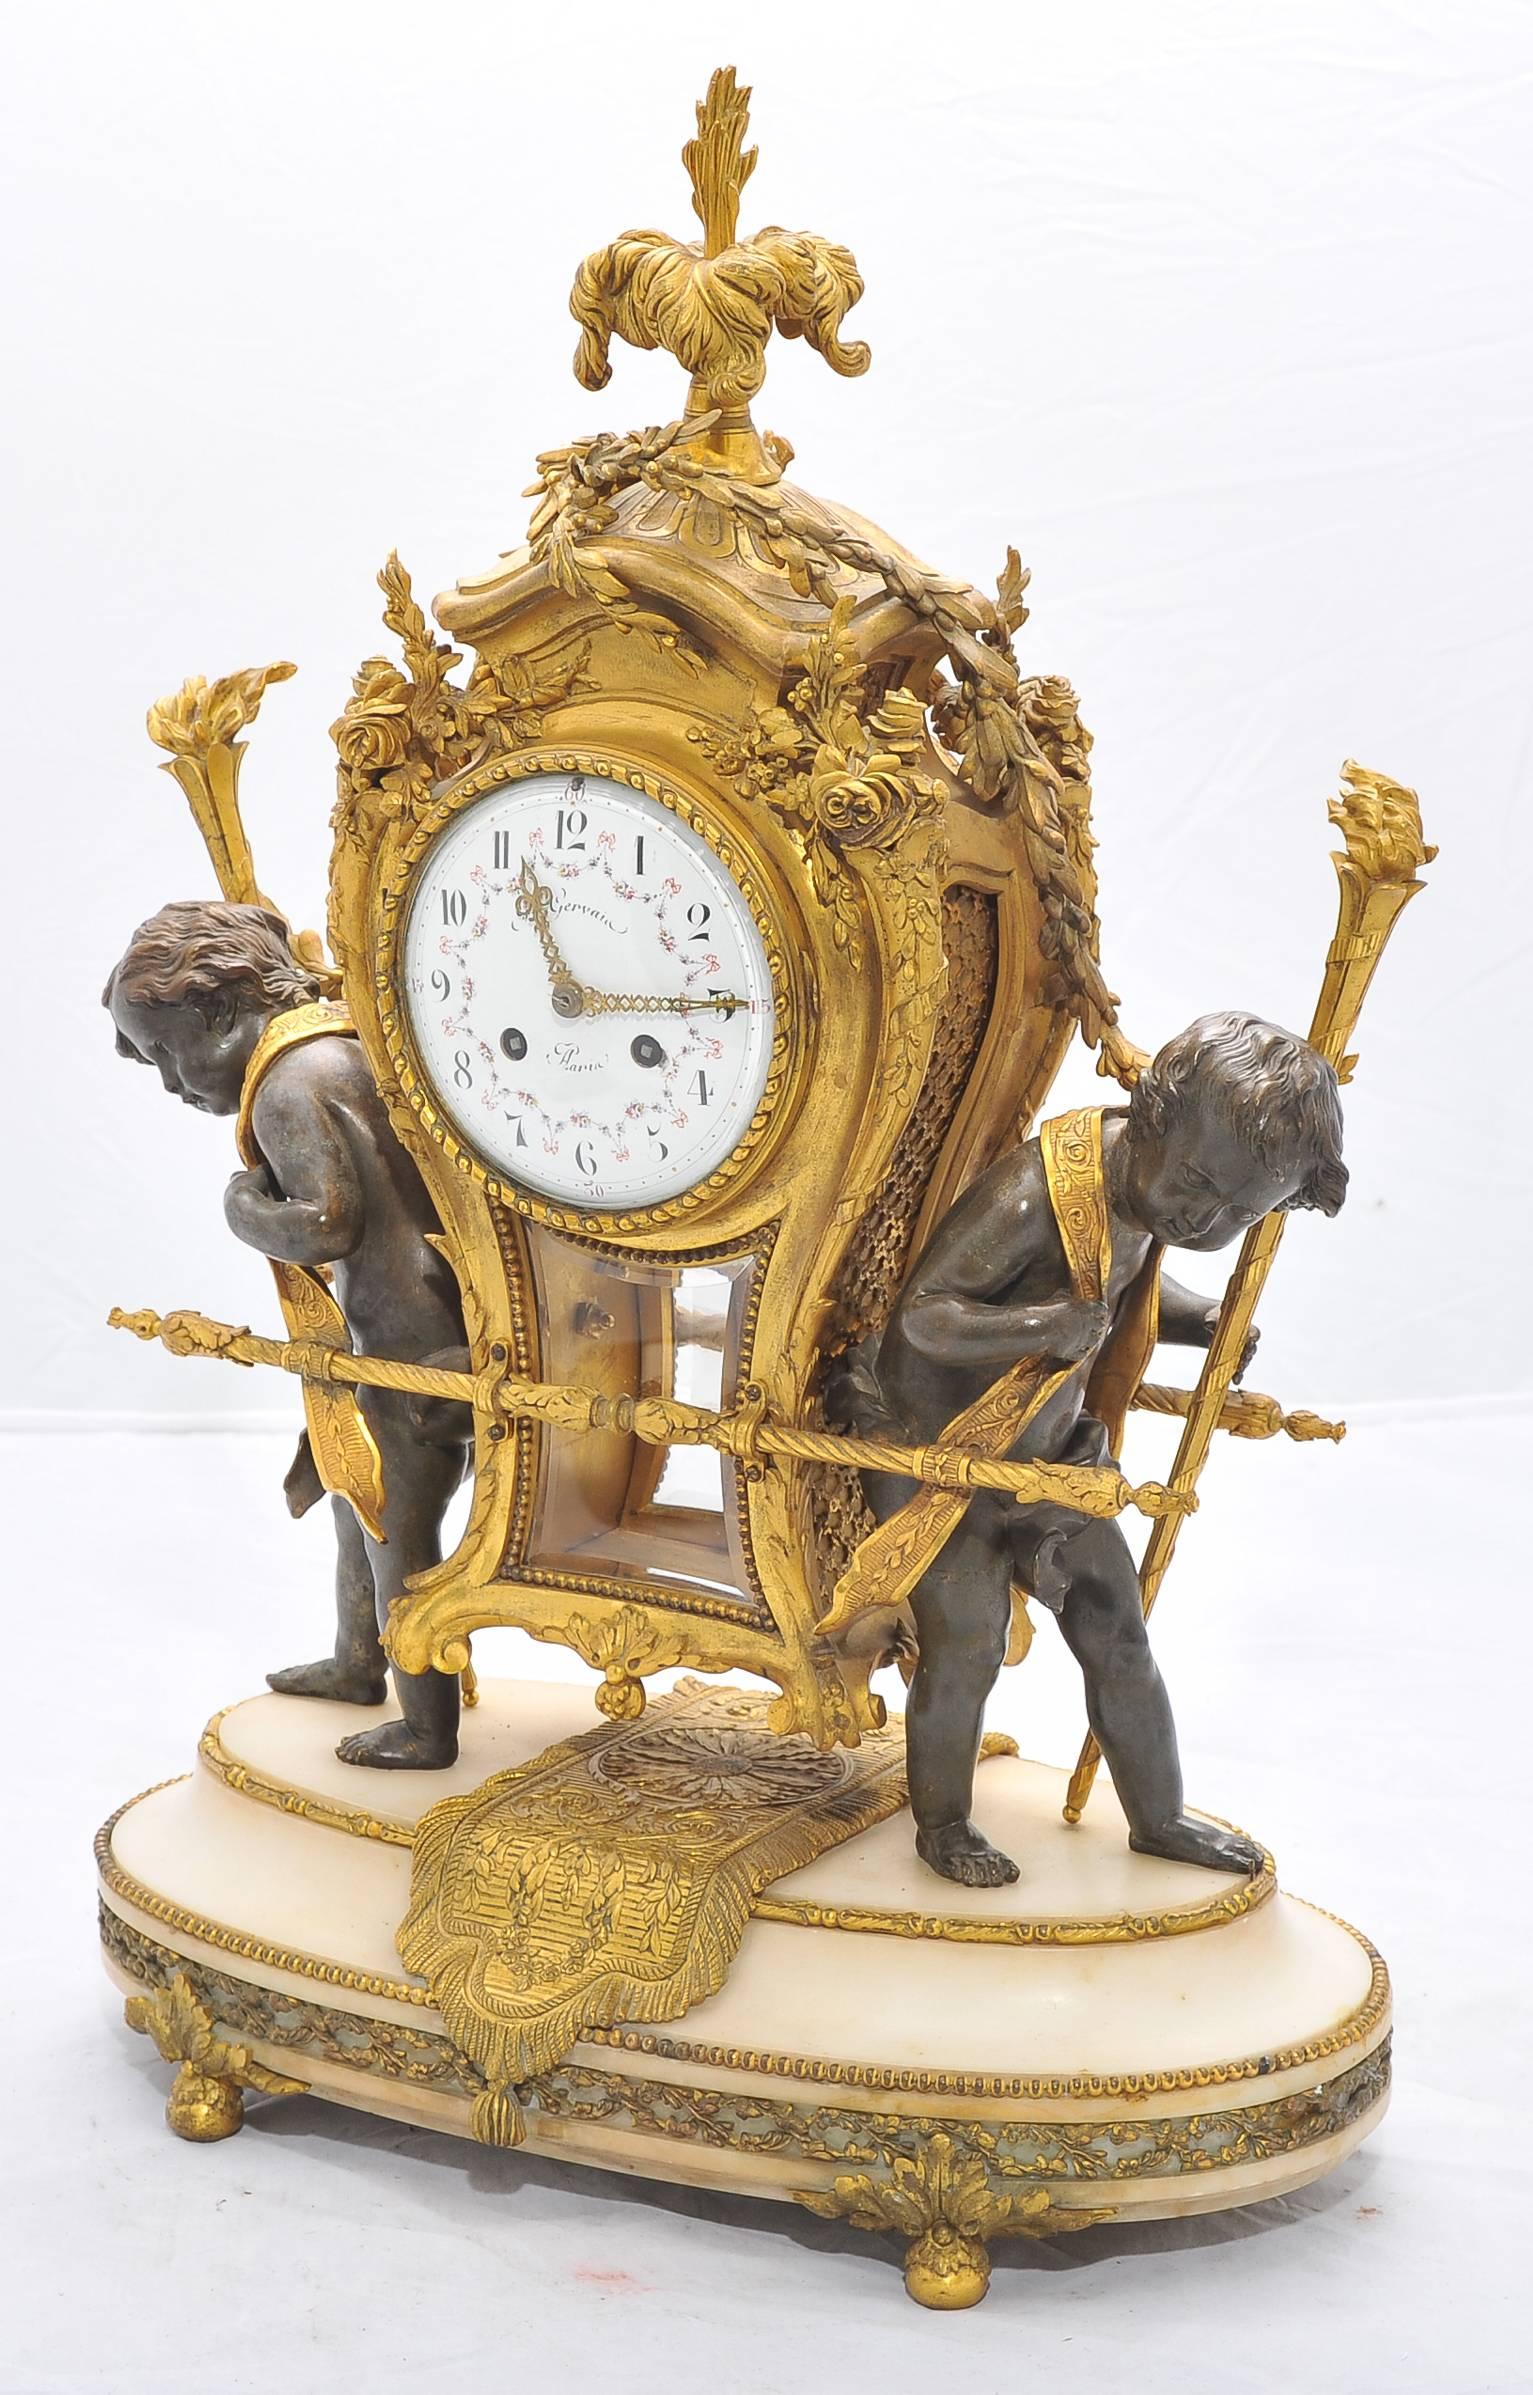 A very impressive good quality 19th century French gilded ormolu, bronze and white marble mantel clock. Having scrolling foliate and ribbon decoration, two putti carrying the eight day striking clock. Mounted on a white marble ormolu-mounted plinth.